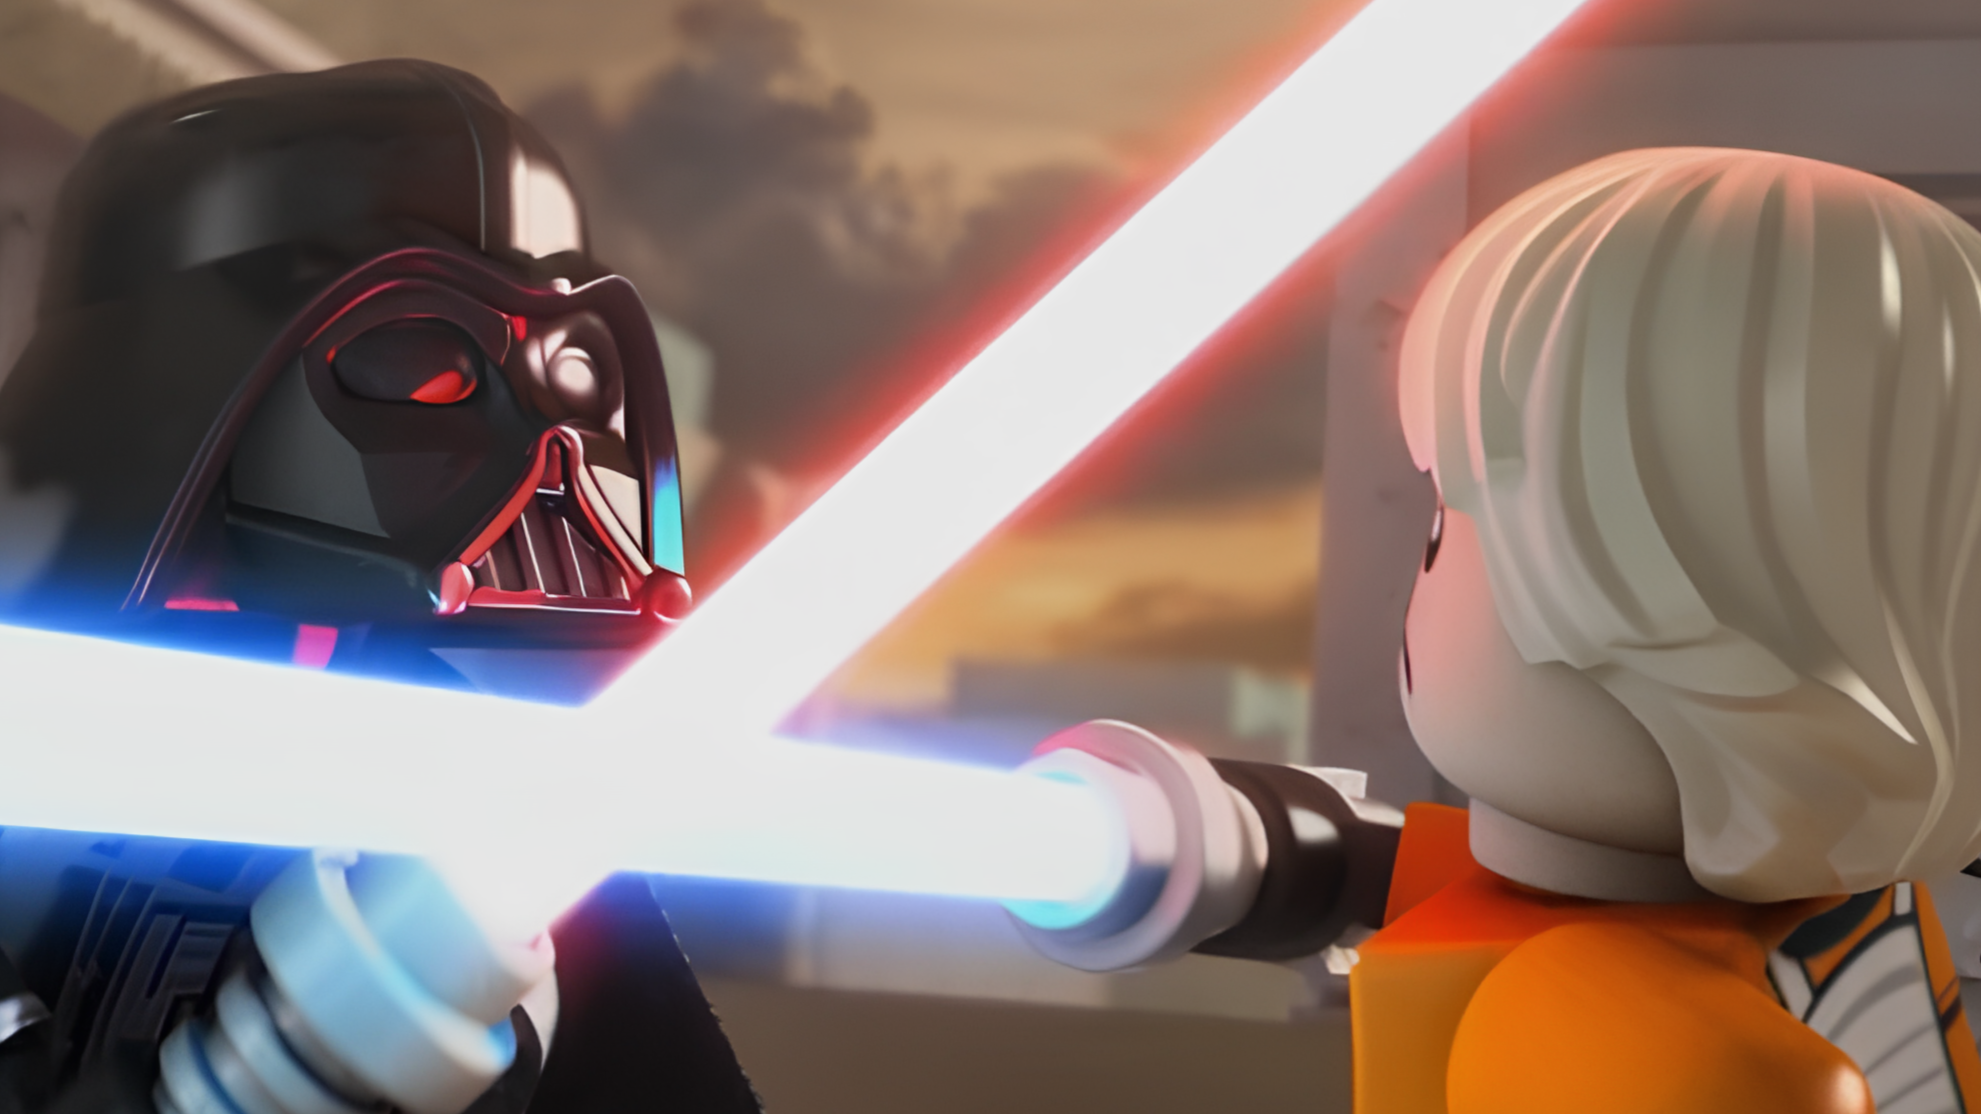 Lego Star Wars The Empire Strikes Out Short Movie Cartoon Network 2012